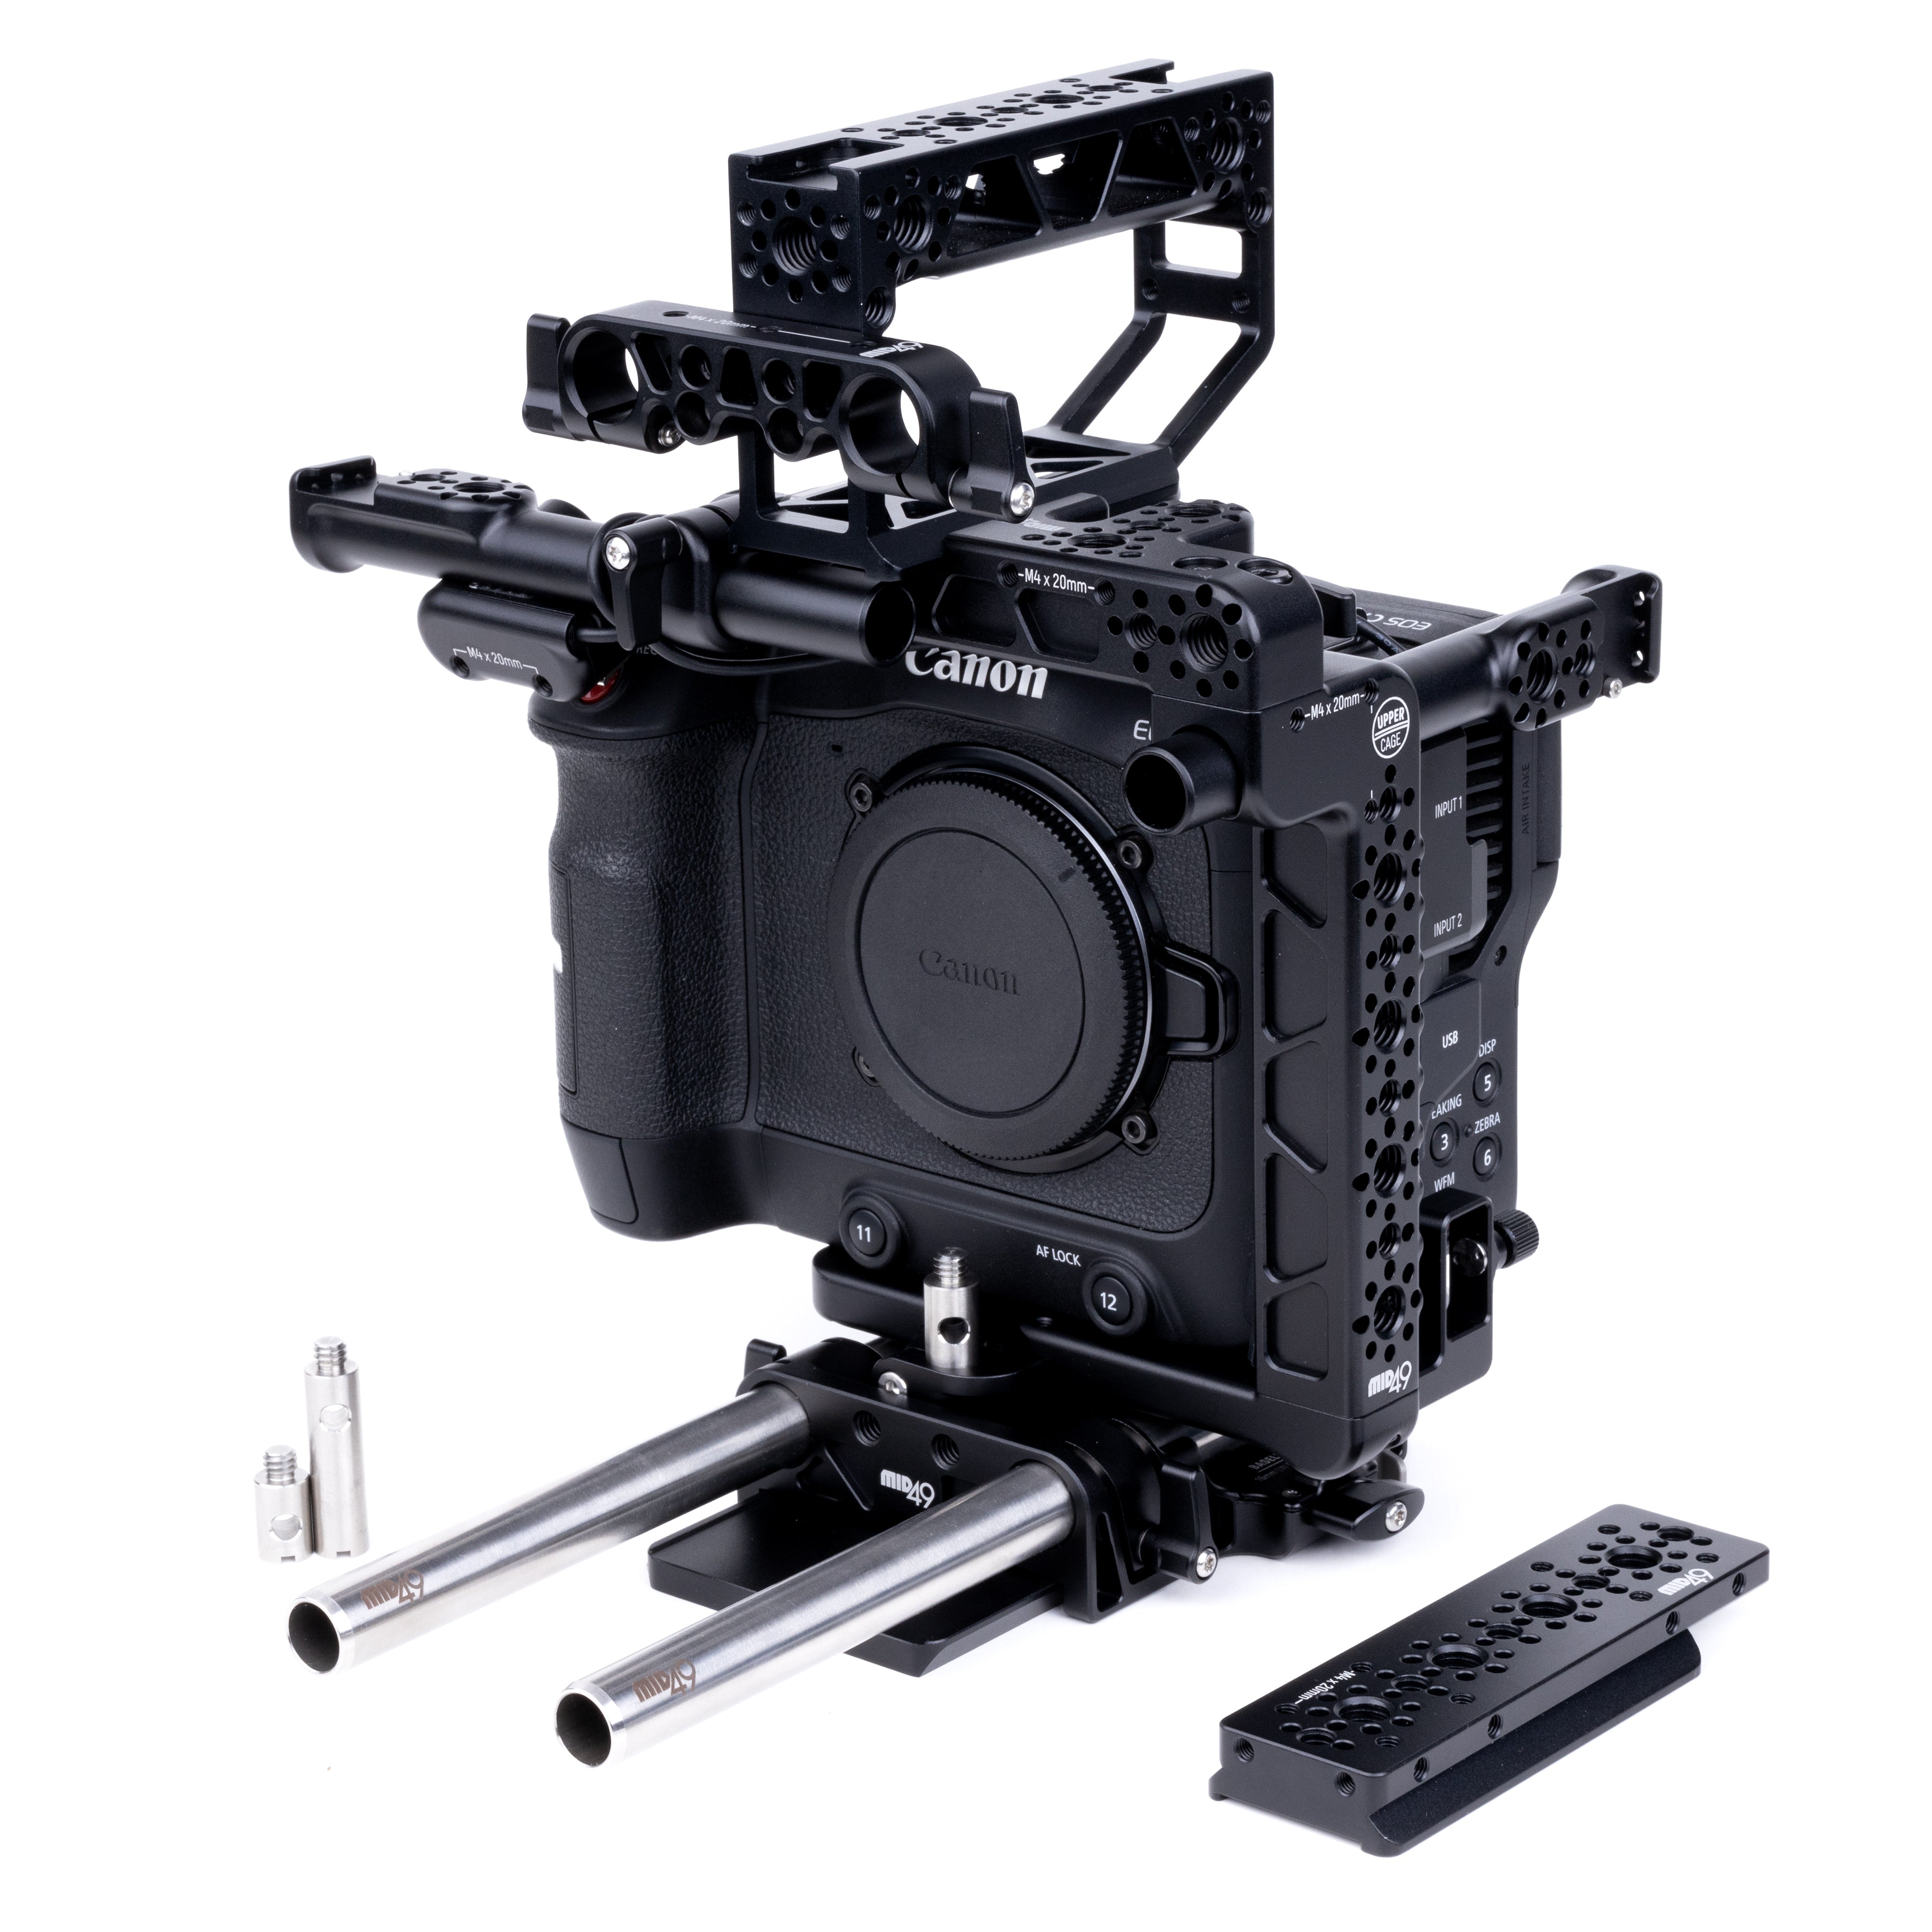 Mid Kit for Canon C70